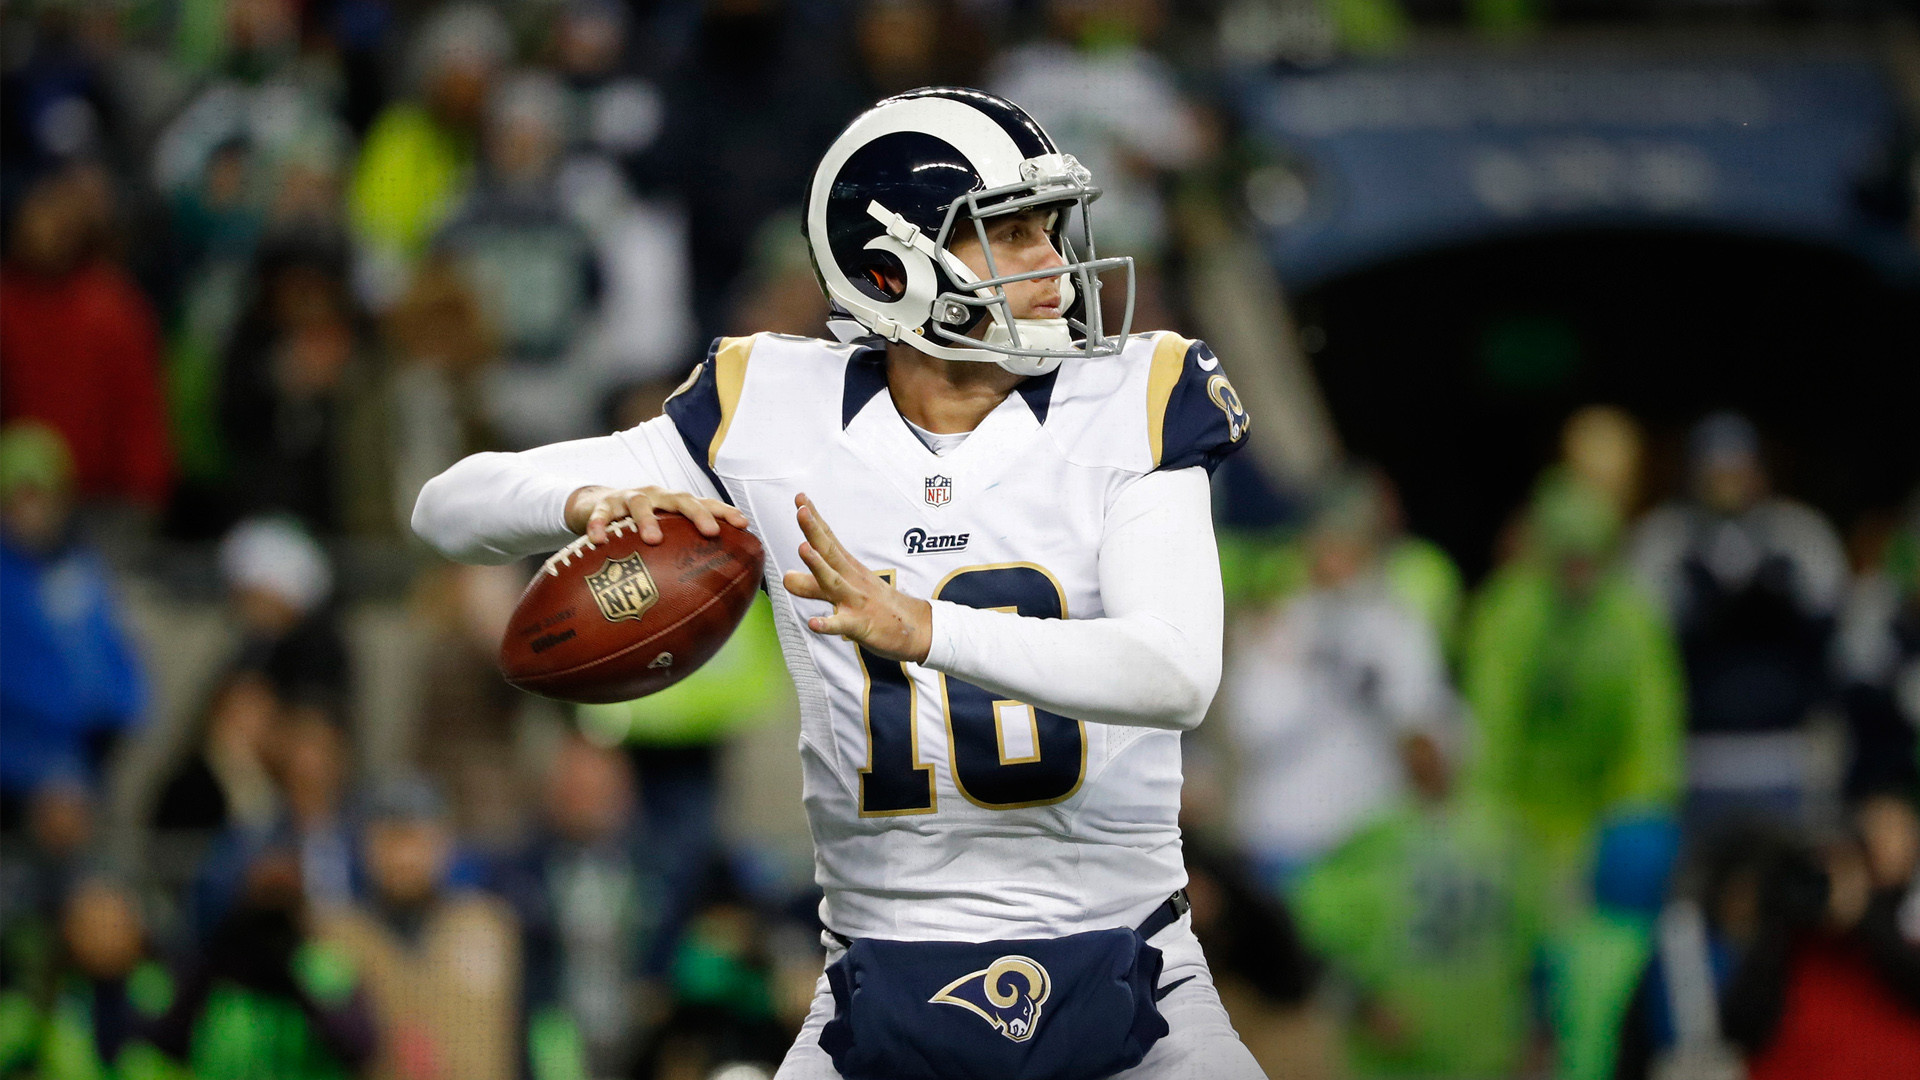 1920x1080 Jared Goff receiving rave reviews from Rams coaches over his development |  downtownrams